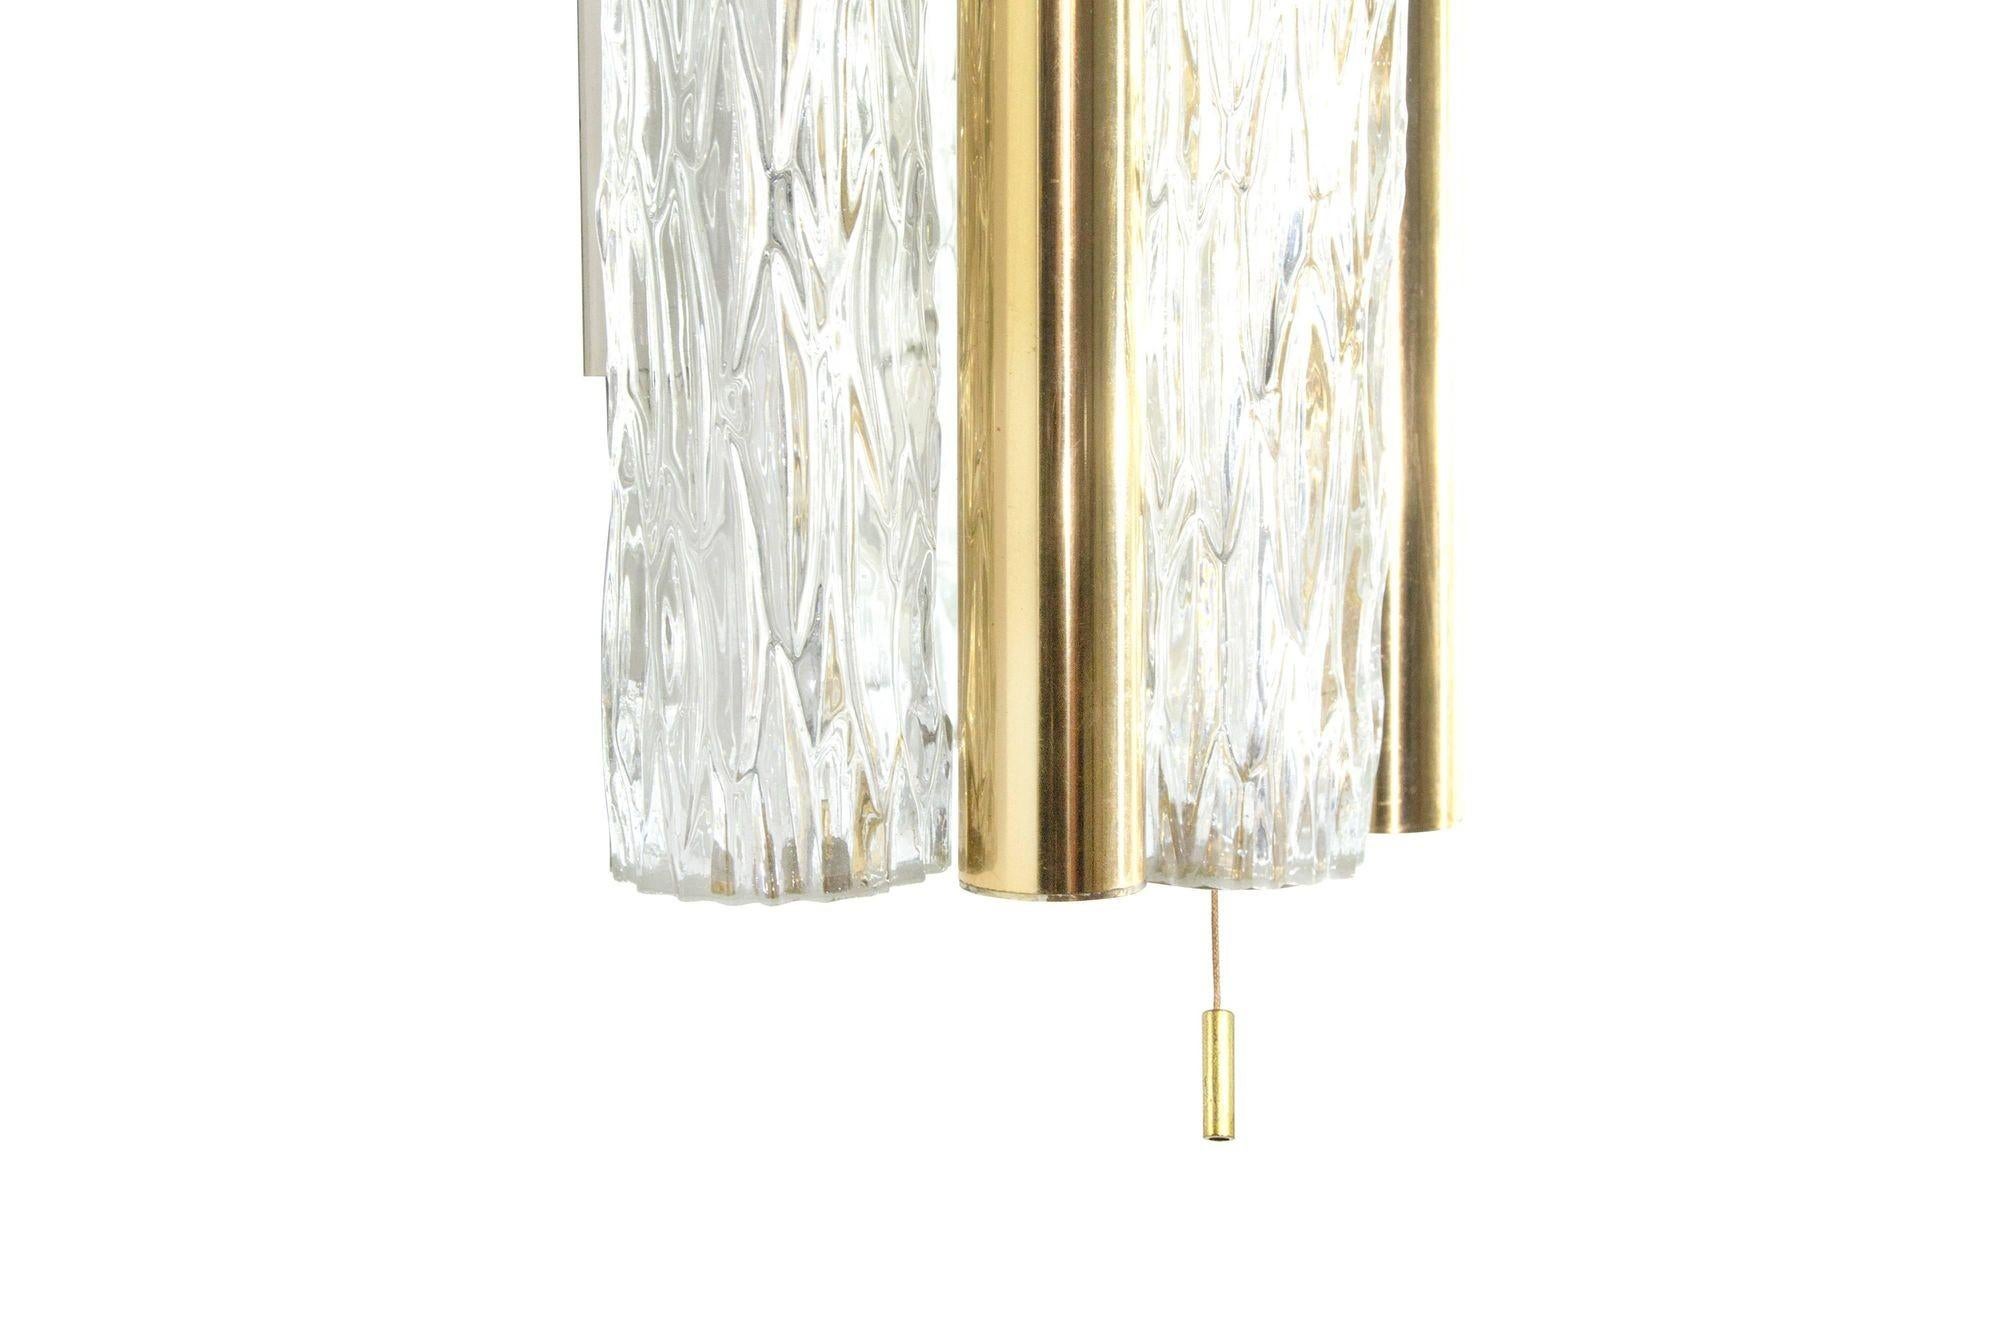 20th Century Set of Murano Glass and Brass Sconces by Doria Leuchten, Germany, C. 1960s For Sale